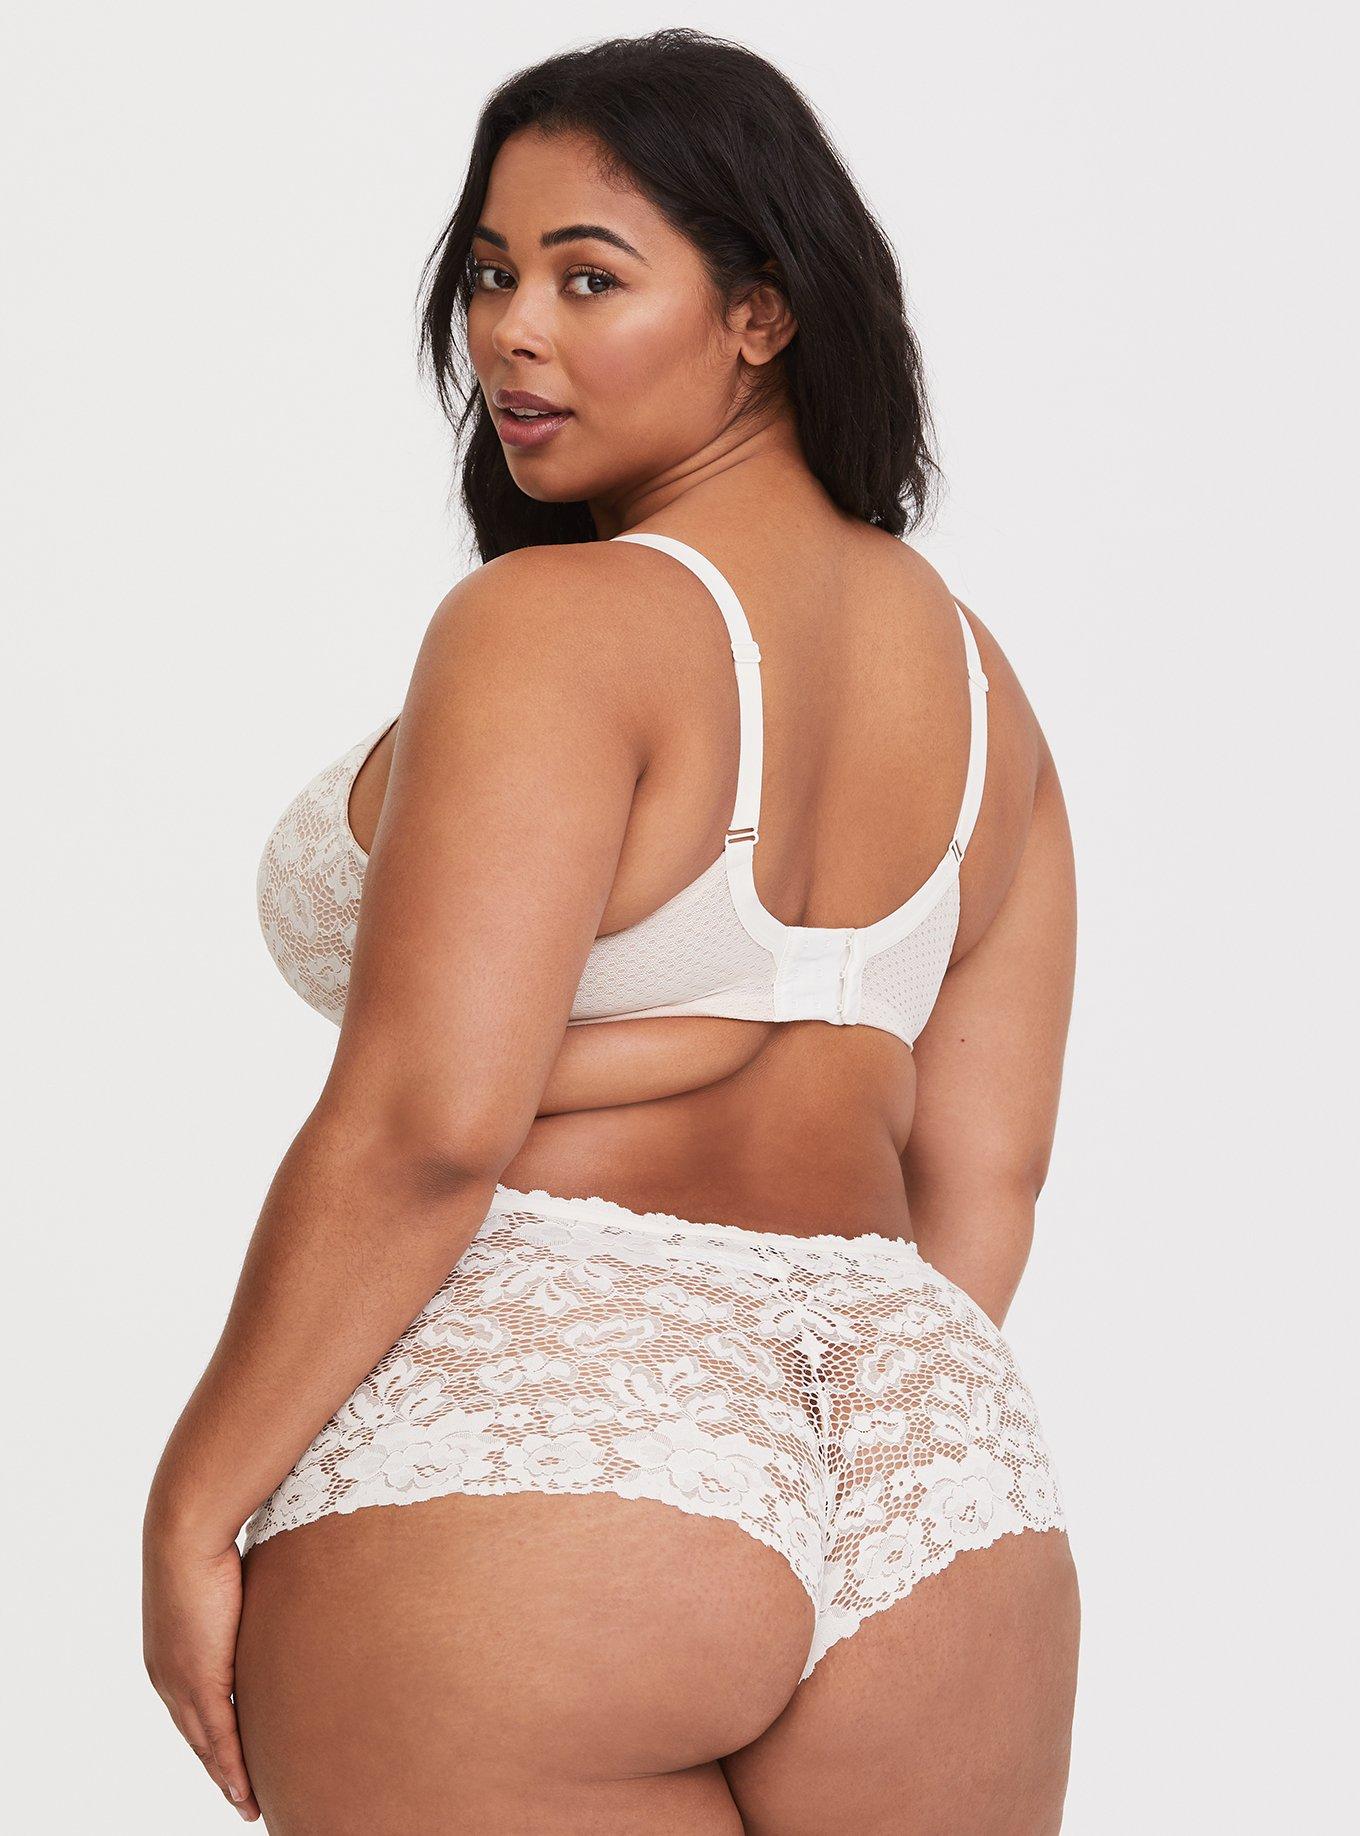 Playful and Bold with the Torrid Super Sexy Lingerie Collection